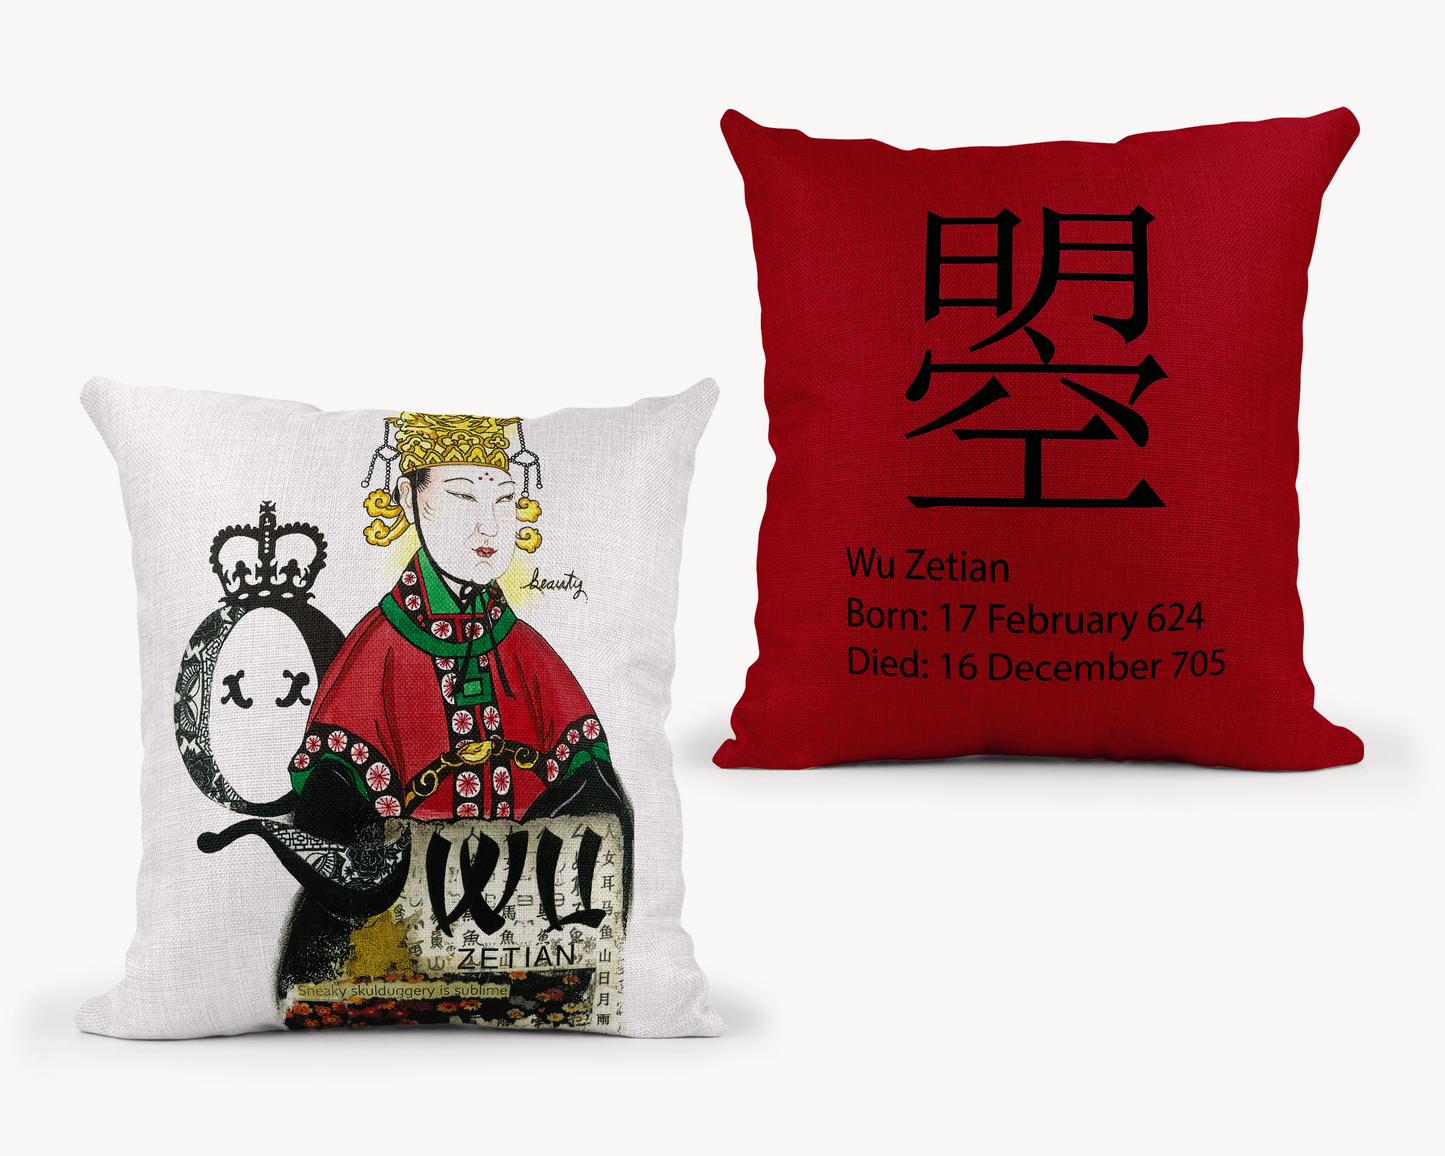 Empress WU Colour Pillow Cover -Red Back - 18x18